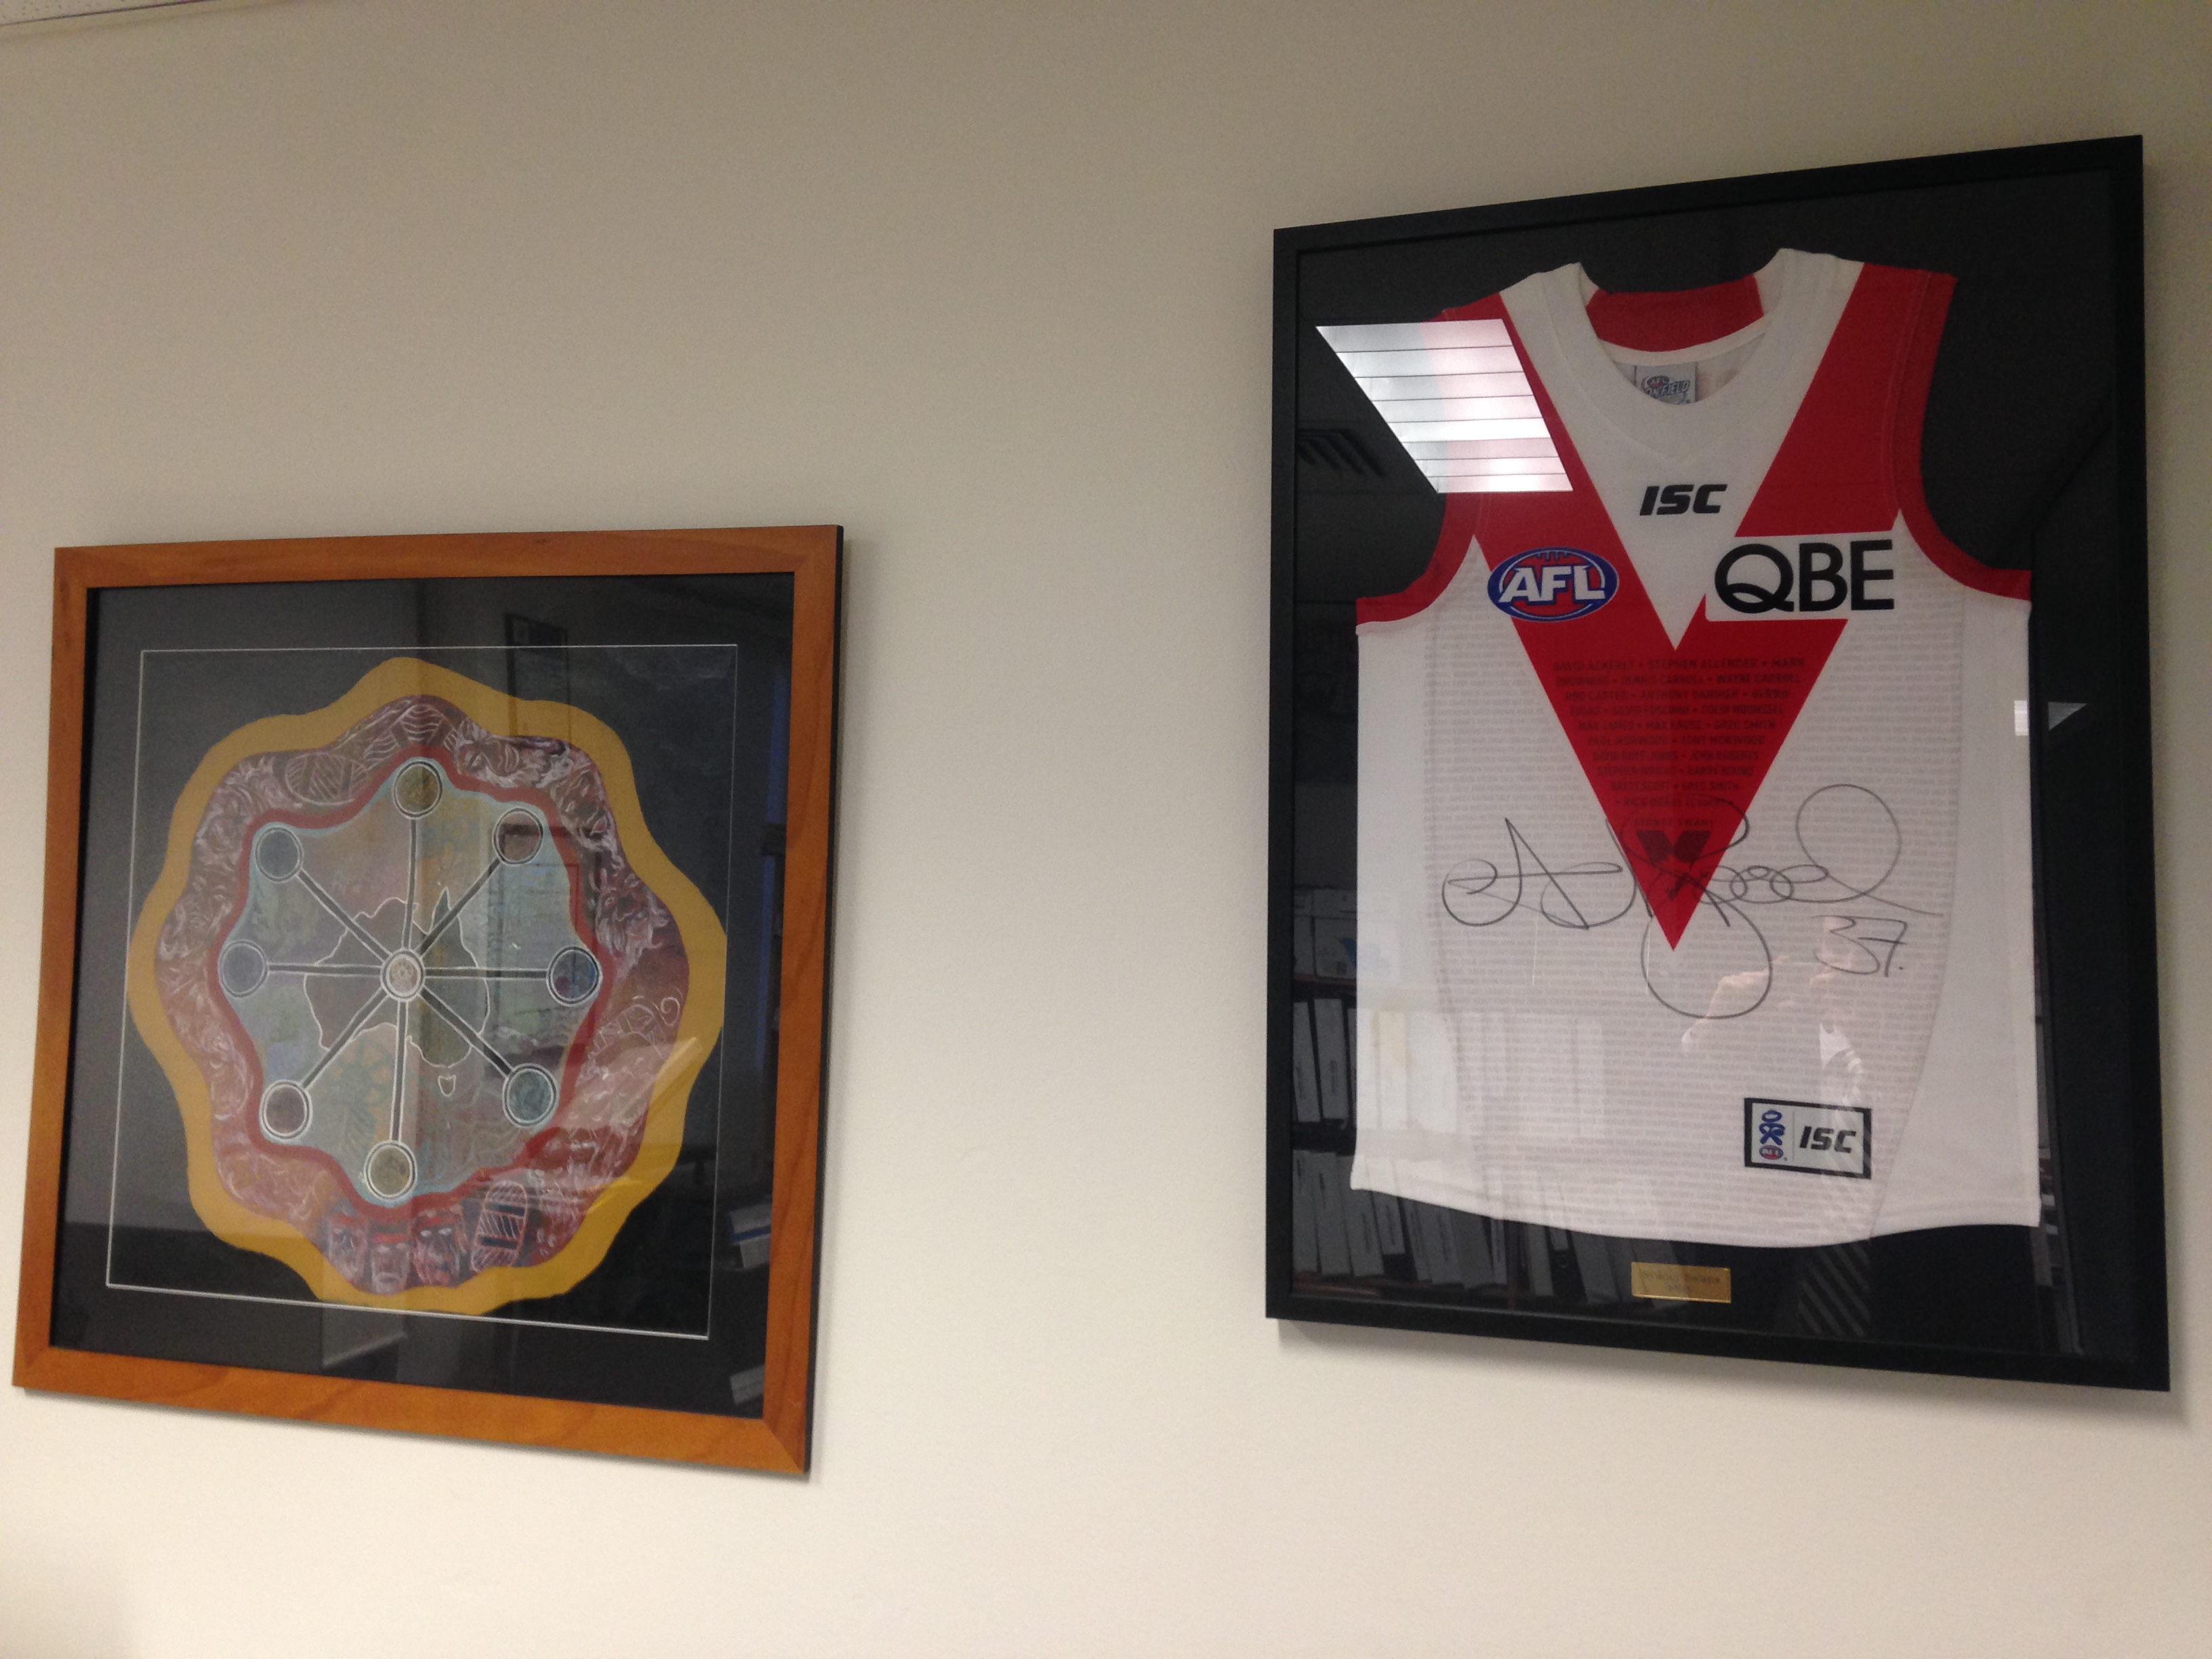 Racism in Australia: Hanging in our office; Aboriginal artwork and a signed Adam Goodes jersey